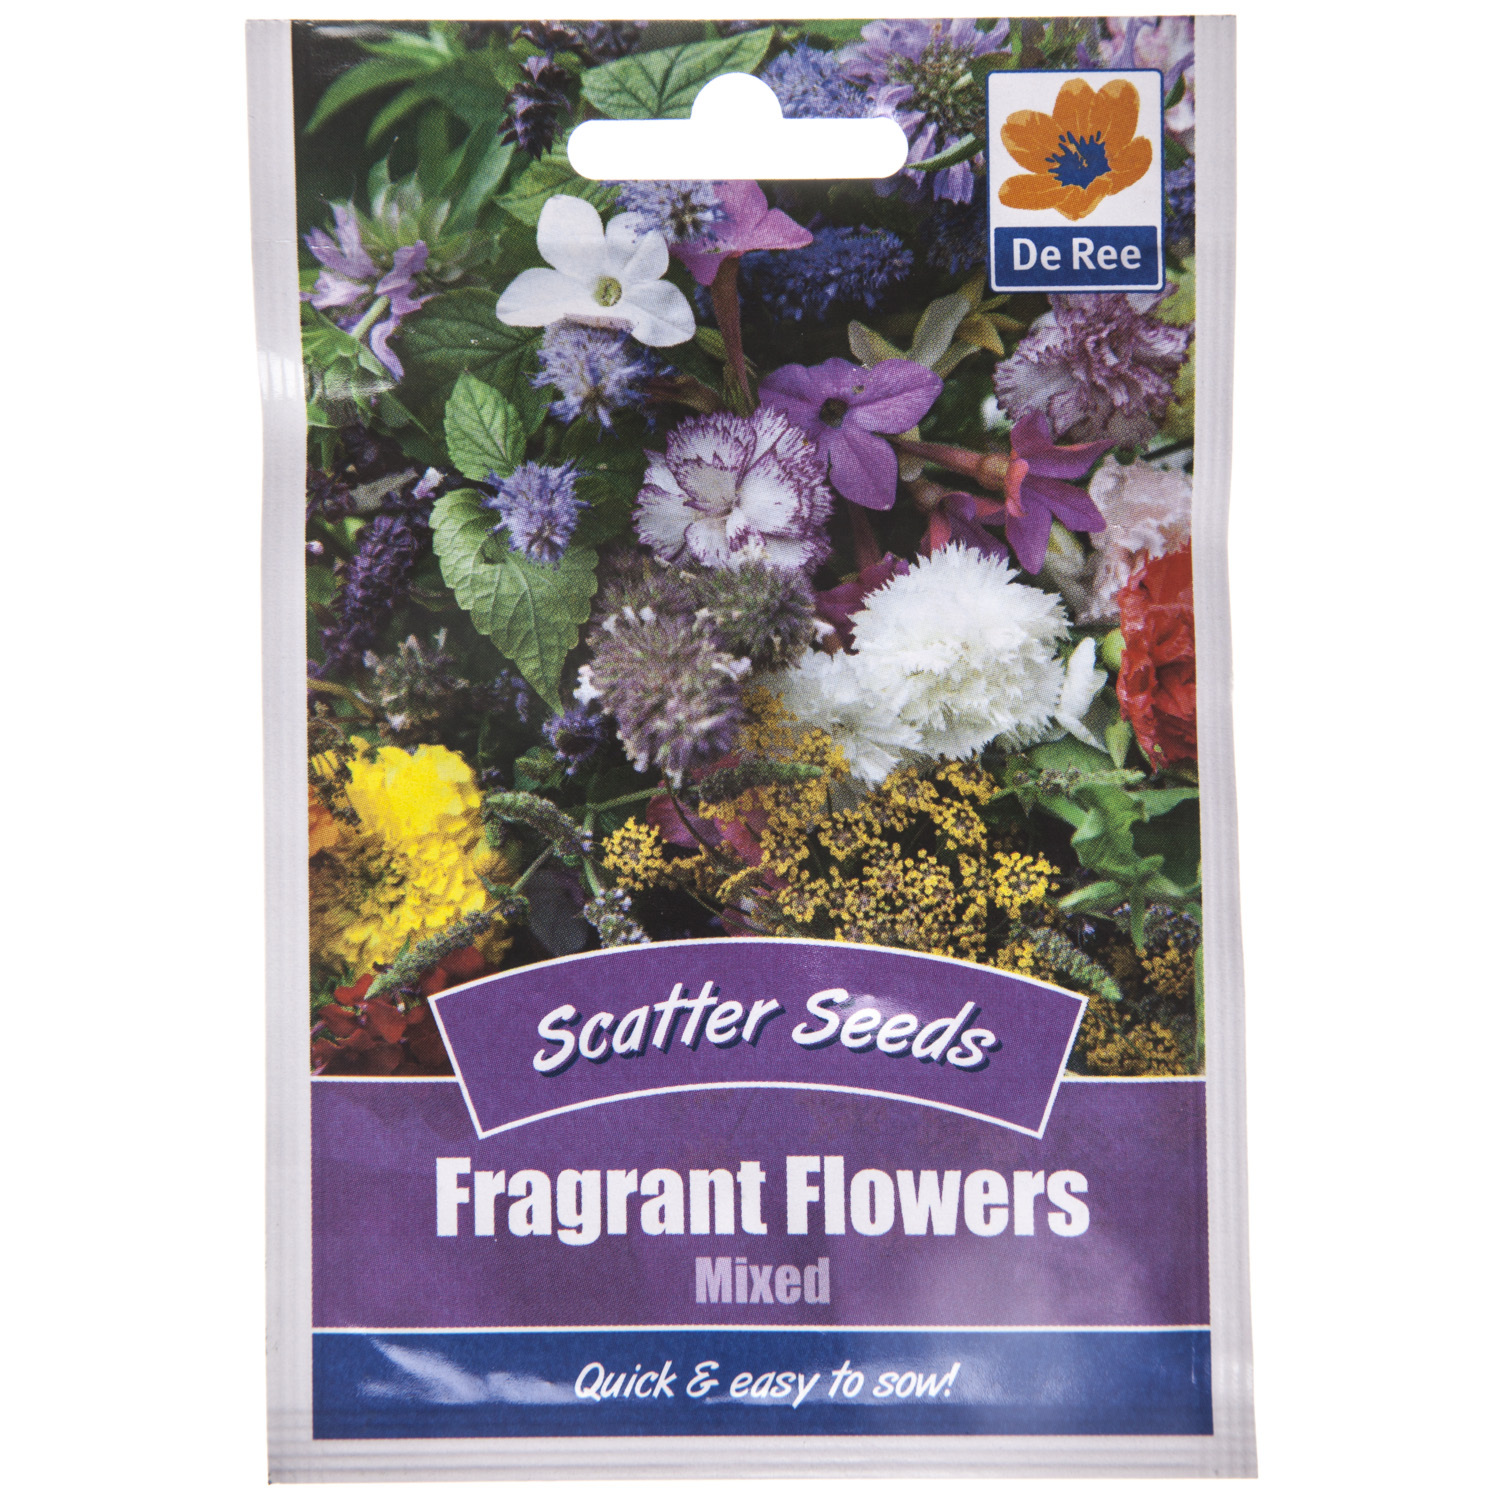 Mixed Fragrant Flowers Scatter Seeds Image